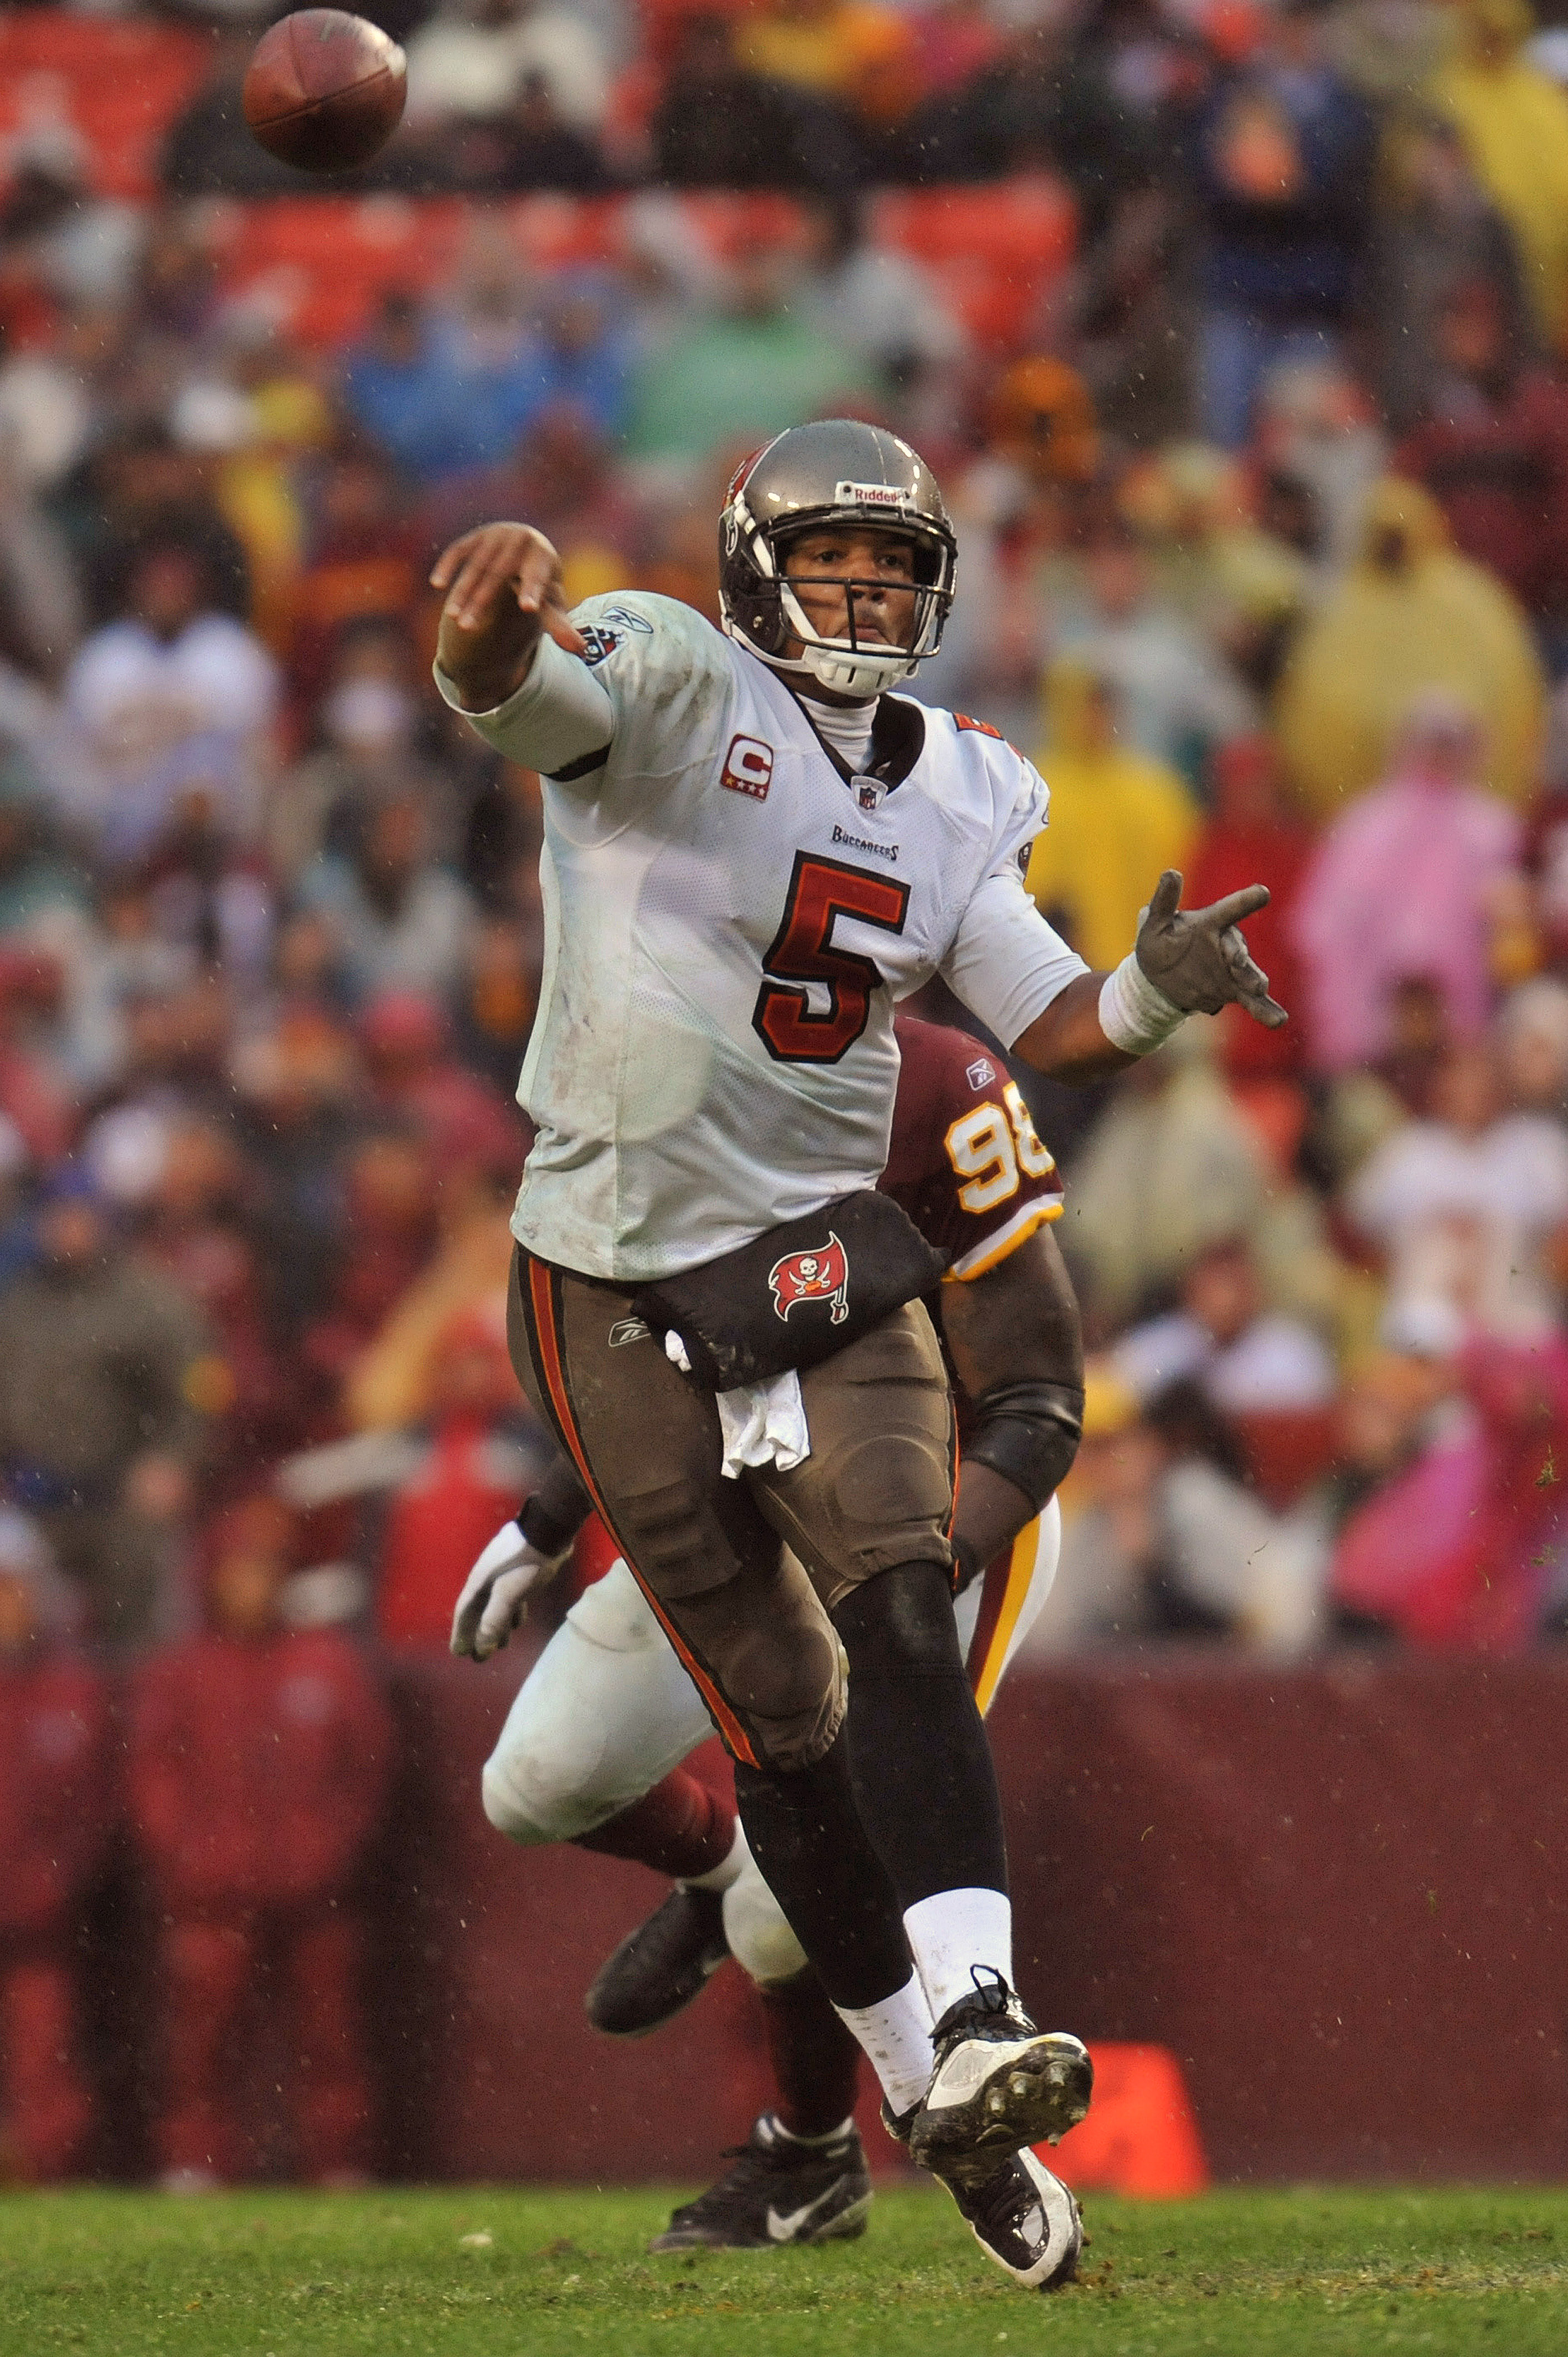 LANDOVER, MD - DECEMBER 12:  Josh Freeman #5 of the Tampa Bay Buccaneers passes against the Washington Redskins  at FedExField on December 12, 2010 in Landover, Maryland. The Buccaneers defeated the Redskins 17-16. (Photo by Larry French/Getty Images)